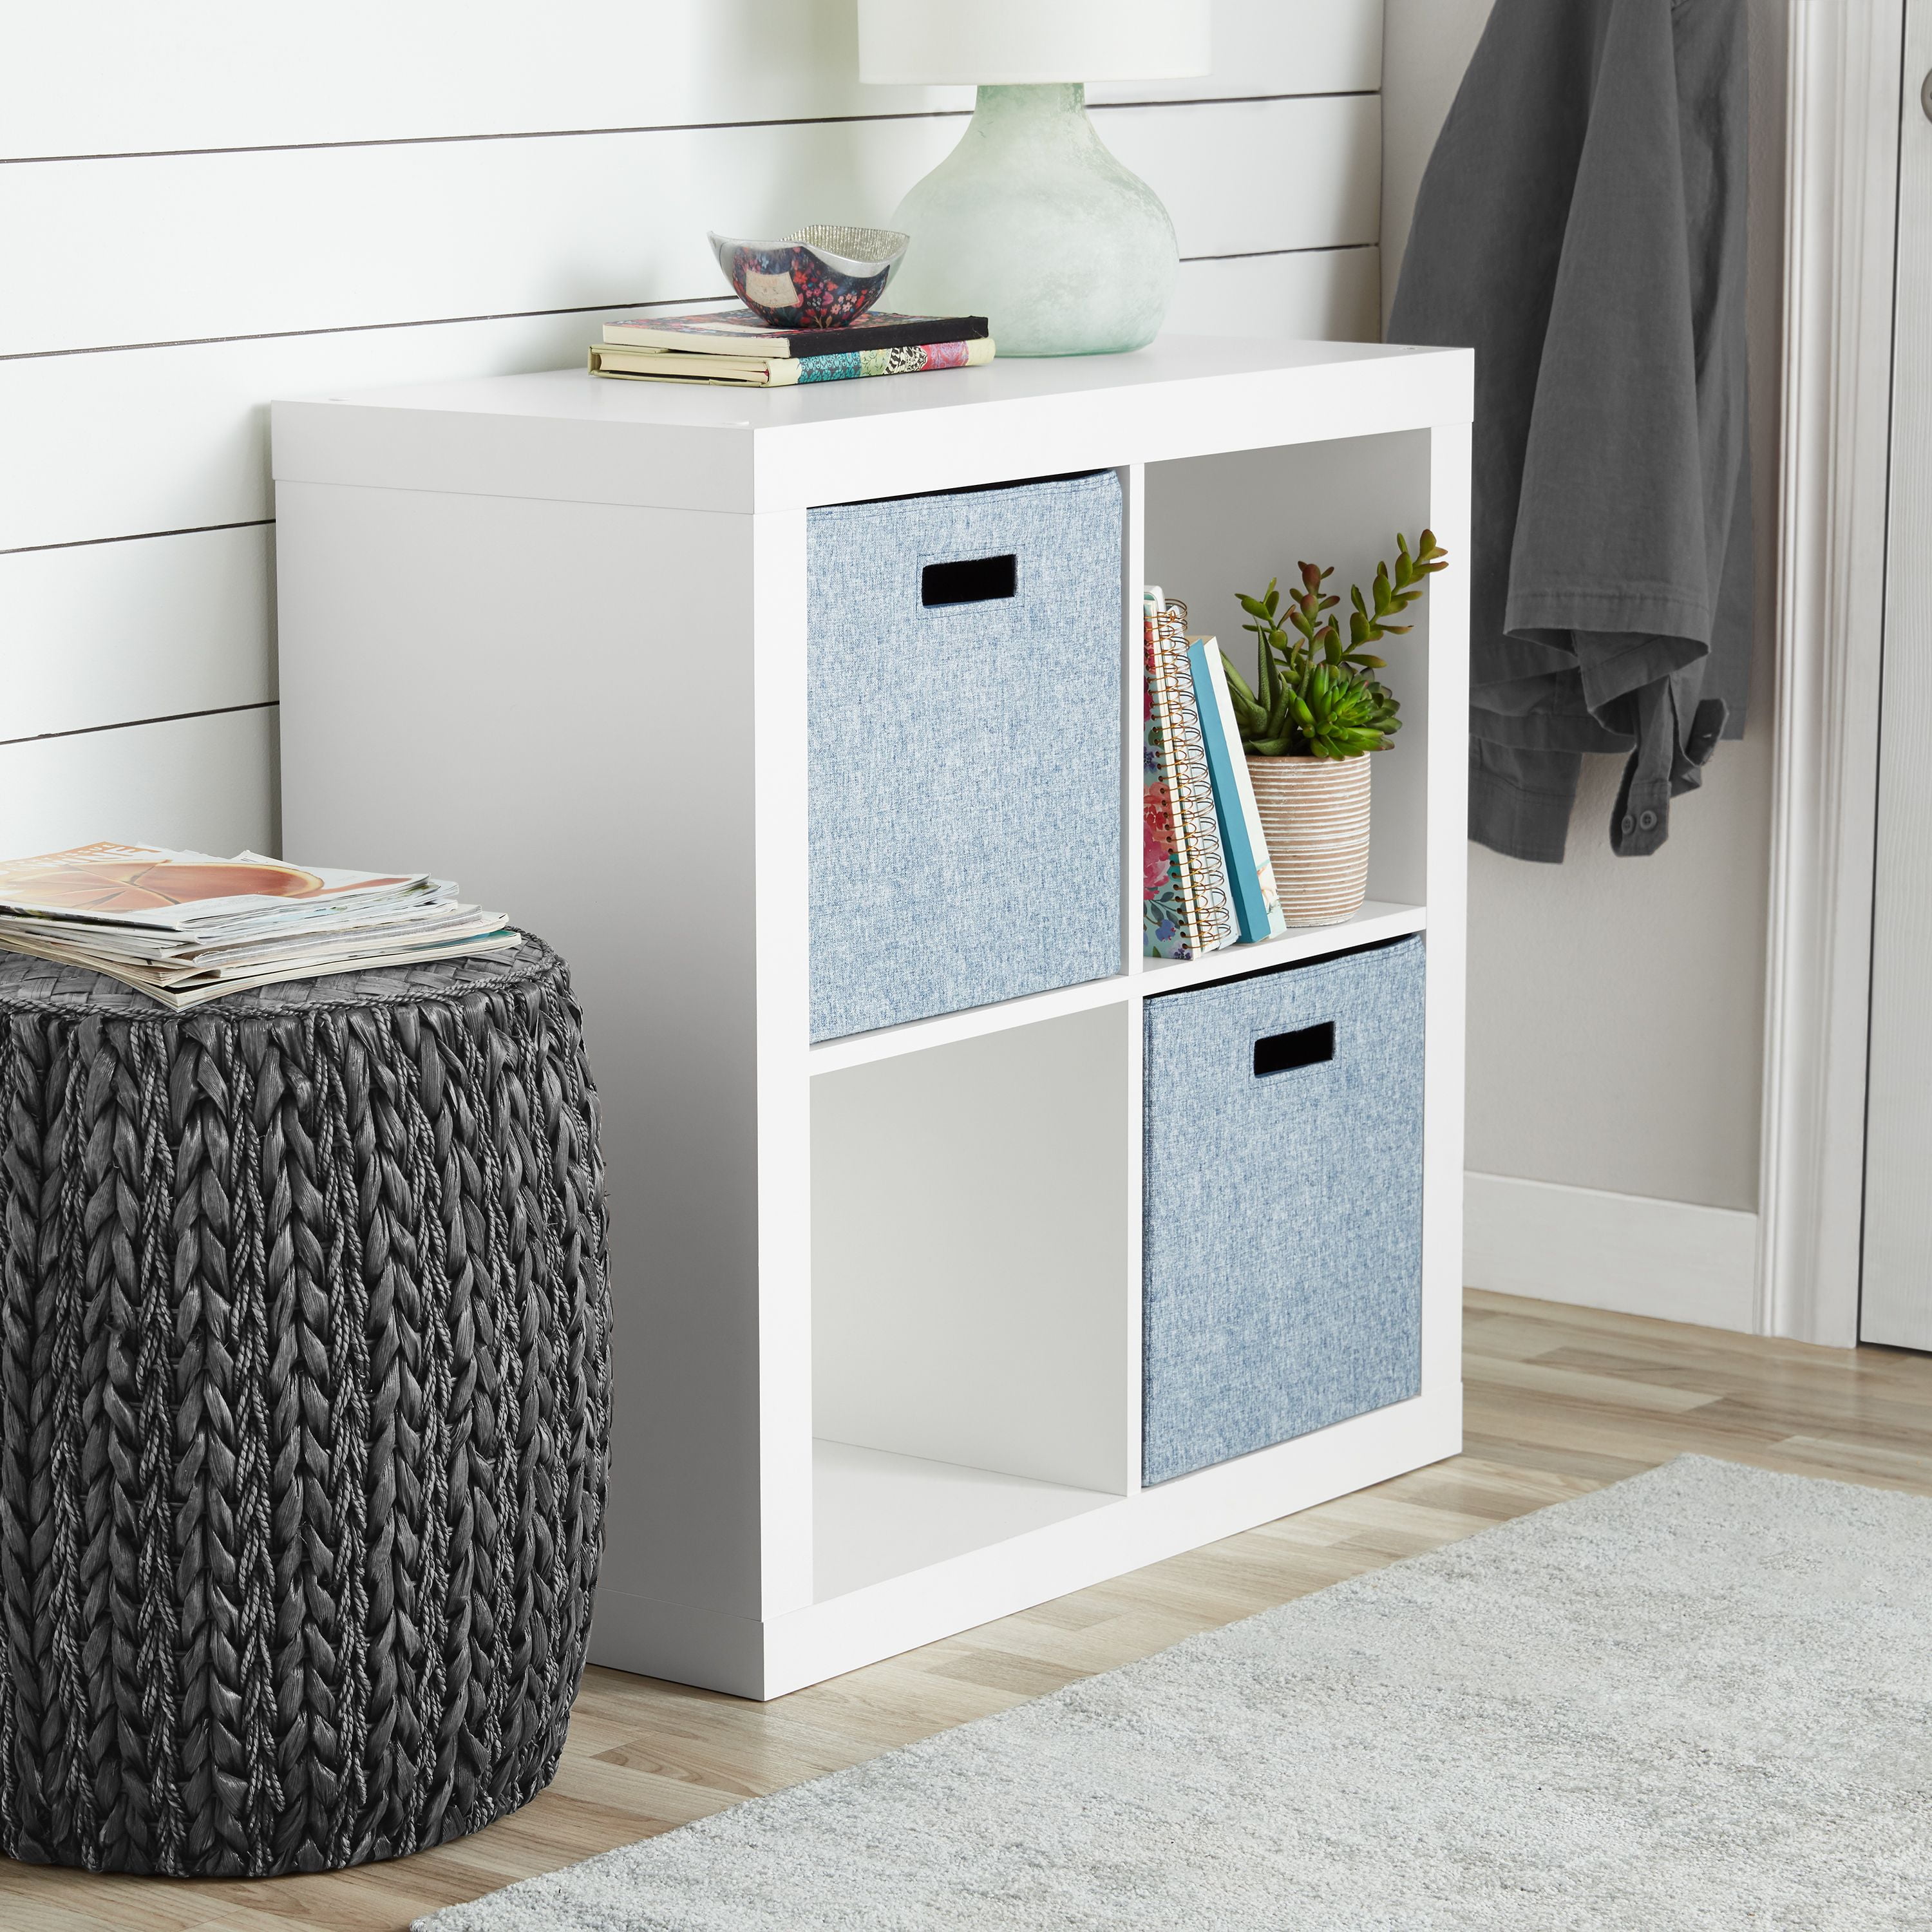 Weathered Bookshelf Square Storage Cabinet 4-Cube Organizer White, 4-Cube Better Homes and Gardens. White, 2-Cube